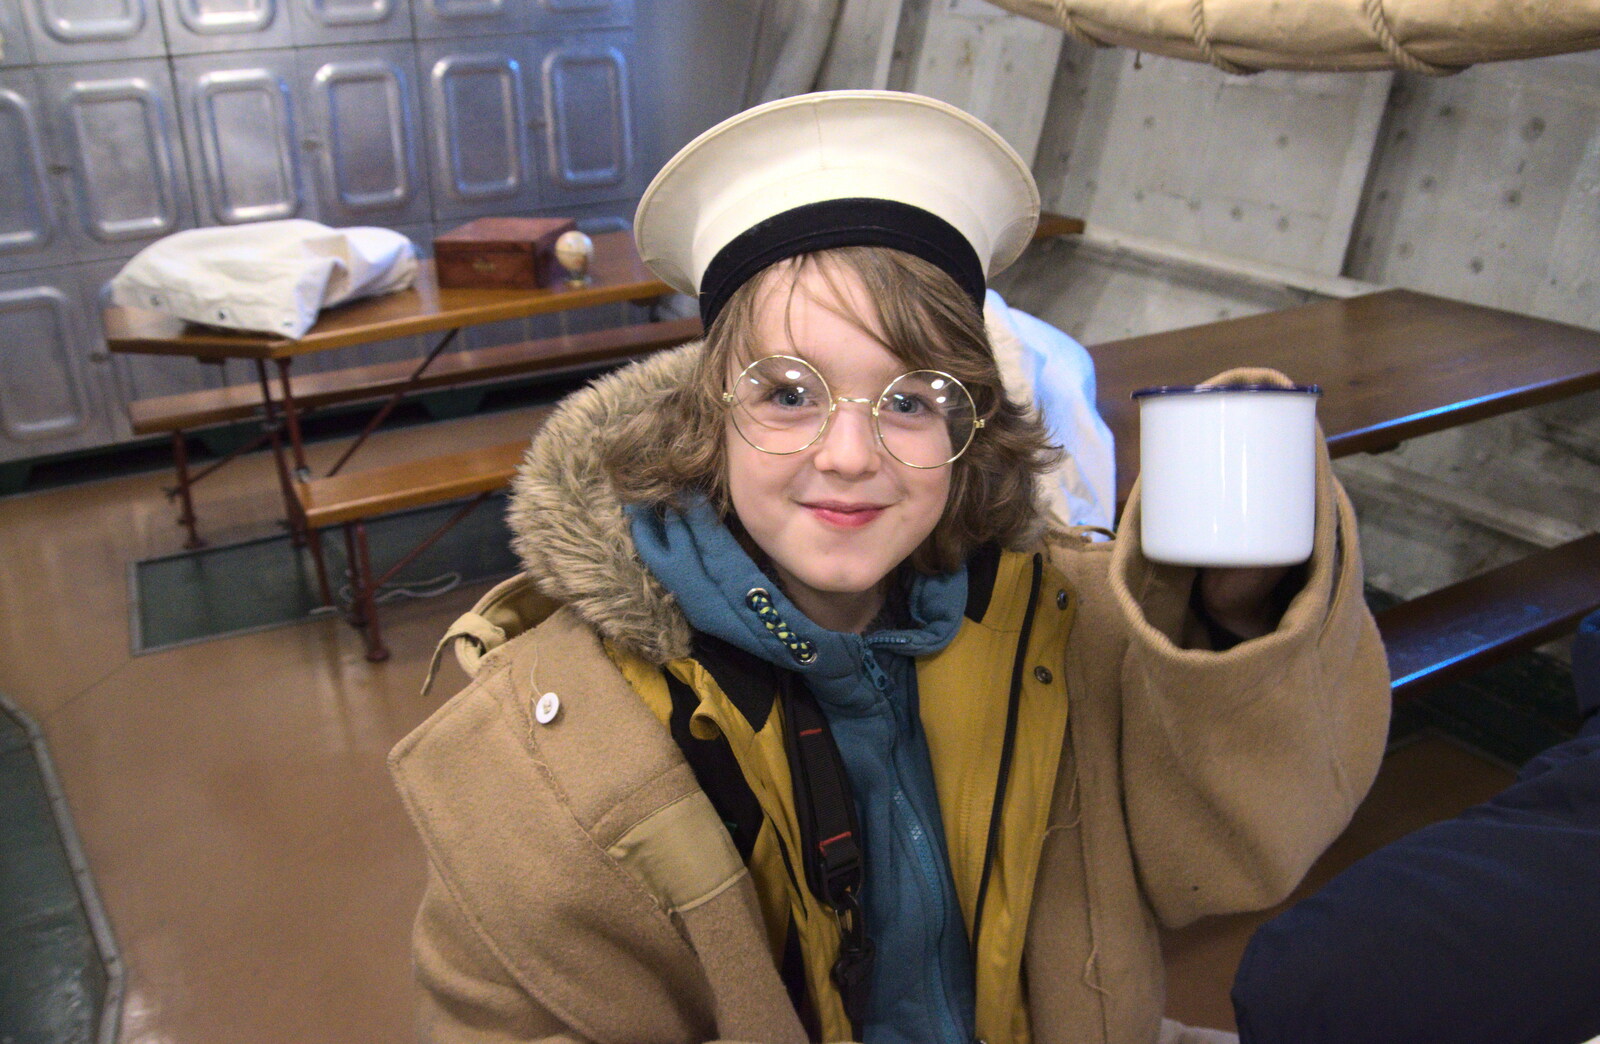 Fred in his 1940s Arctic sailor's gear from HMS Belfast and the South Bank, Southwark, London - 17th February 2020